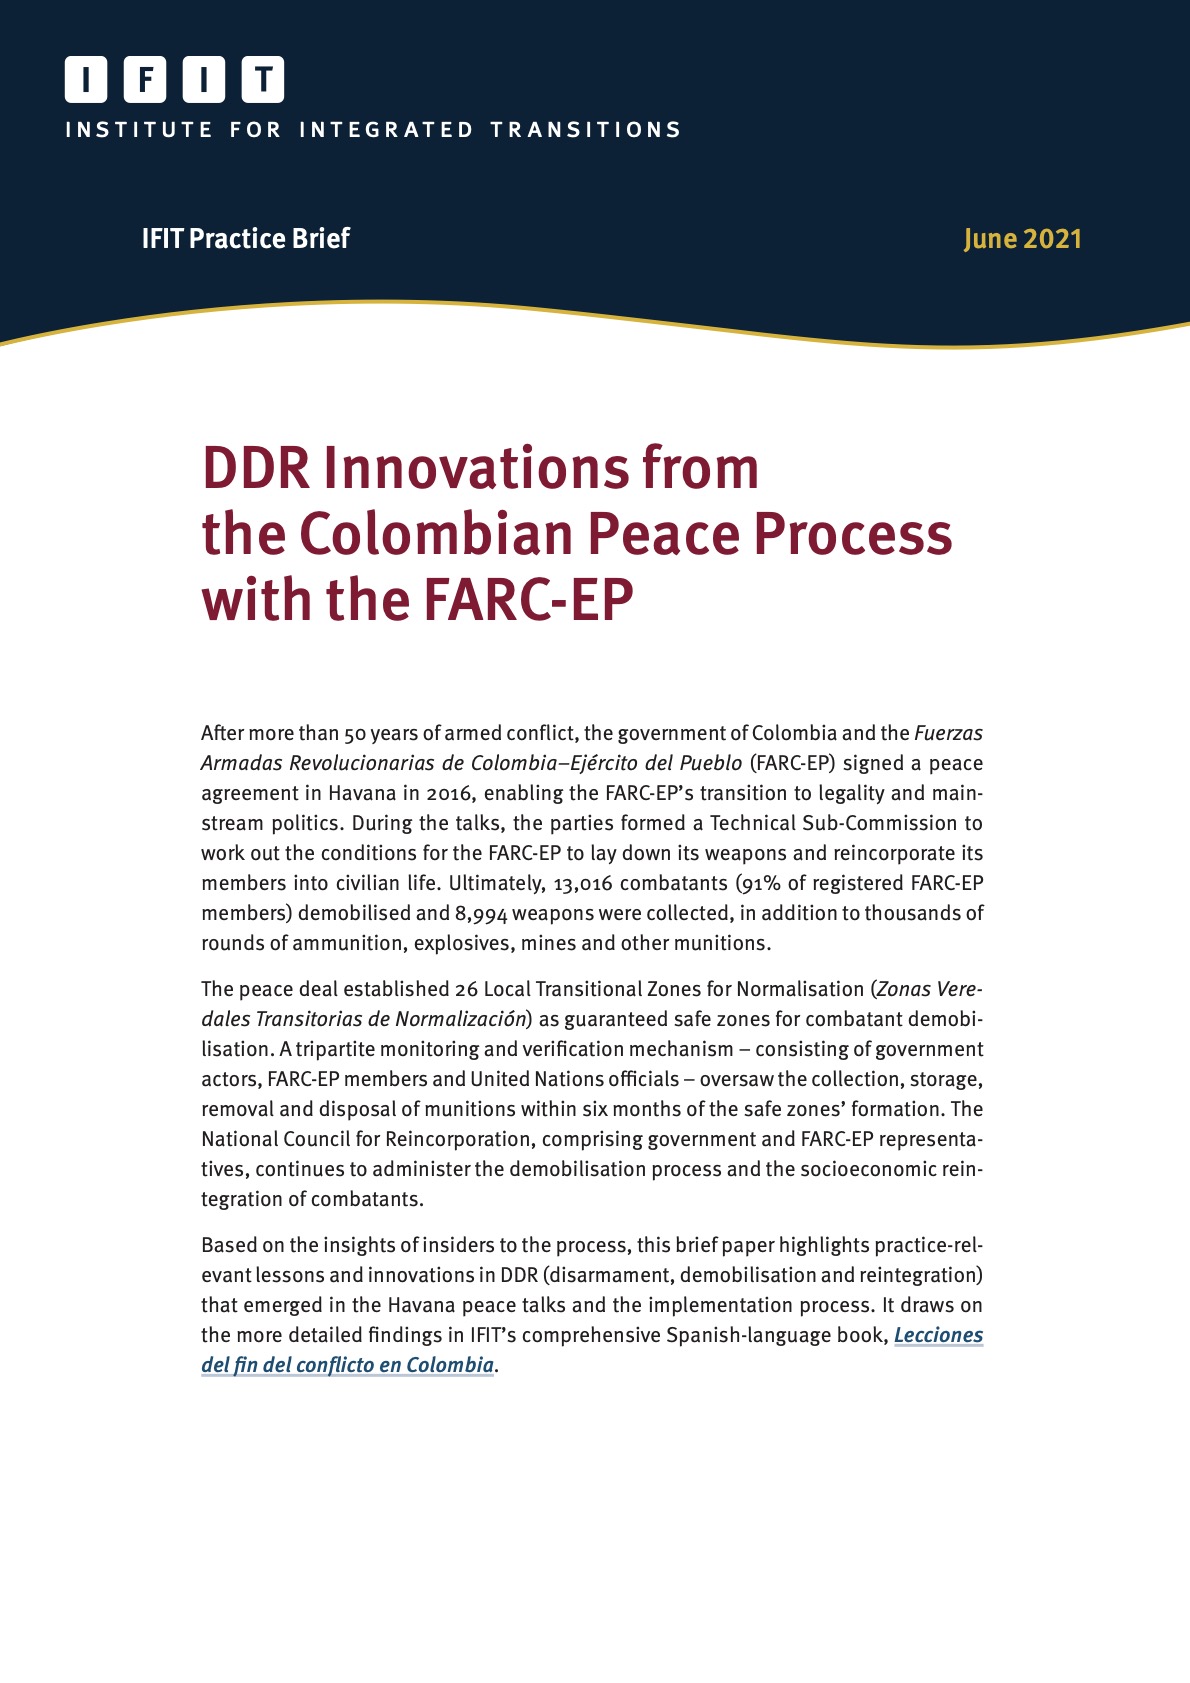 DDR Innovations from the Colombian Peace Process with the FARC-EP